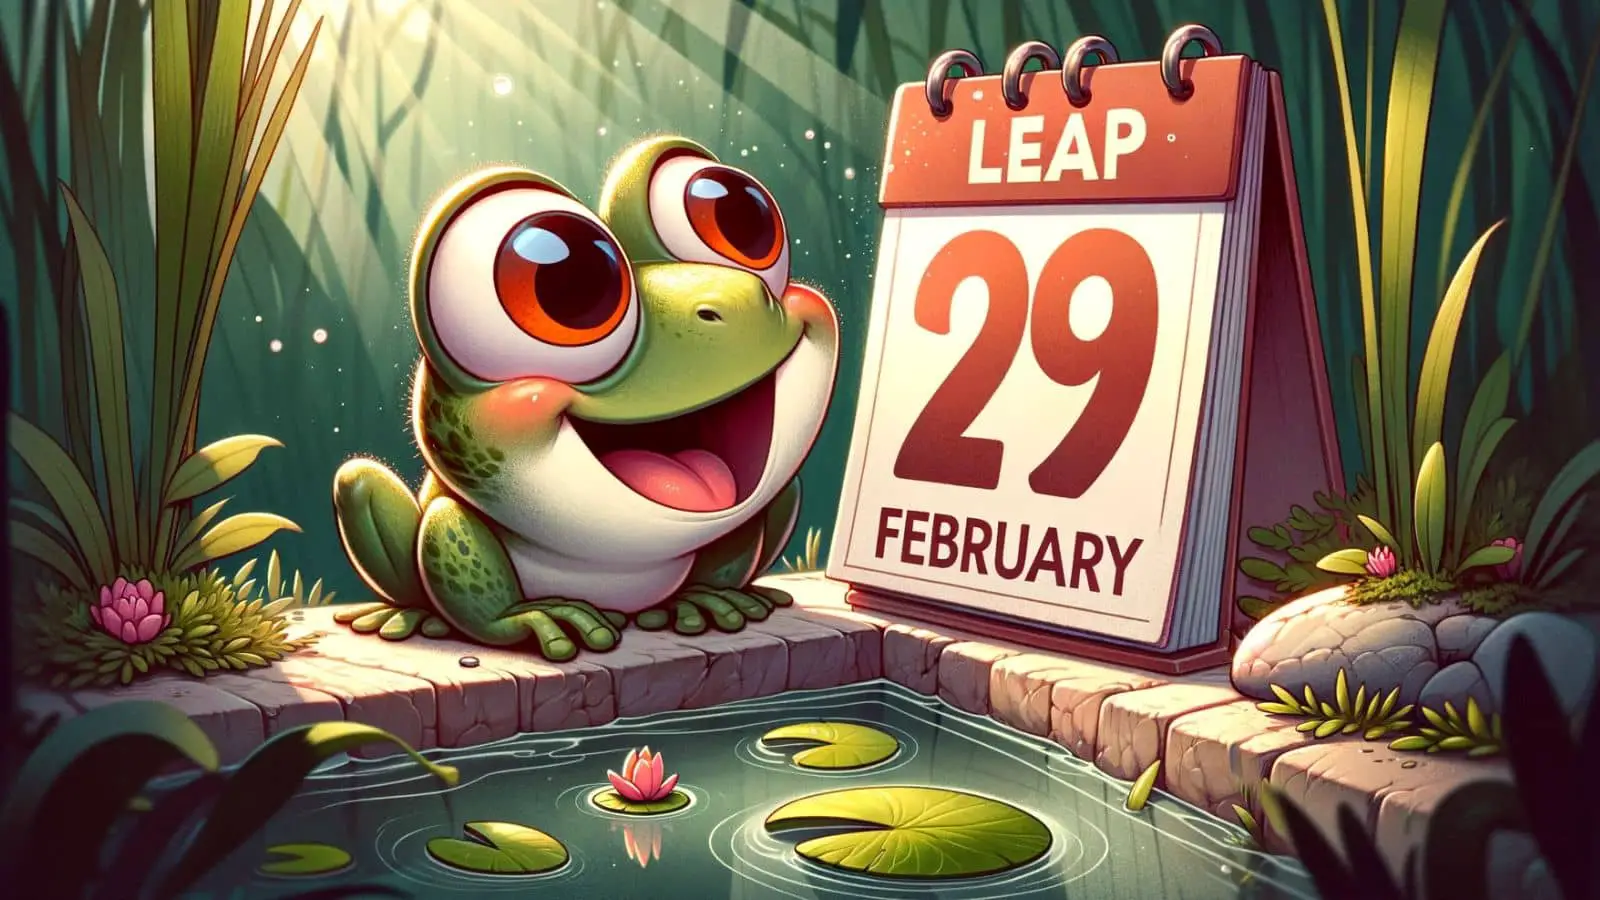 Funny Leap Year Jokes on February 29th